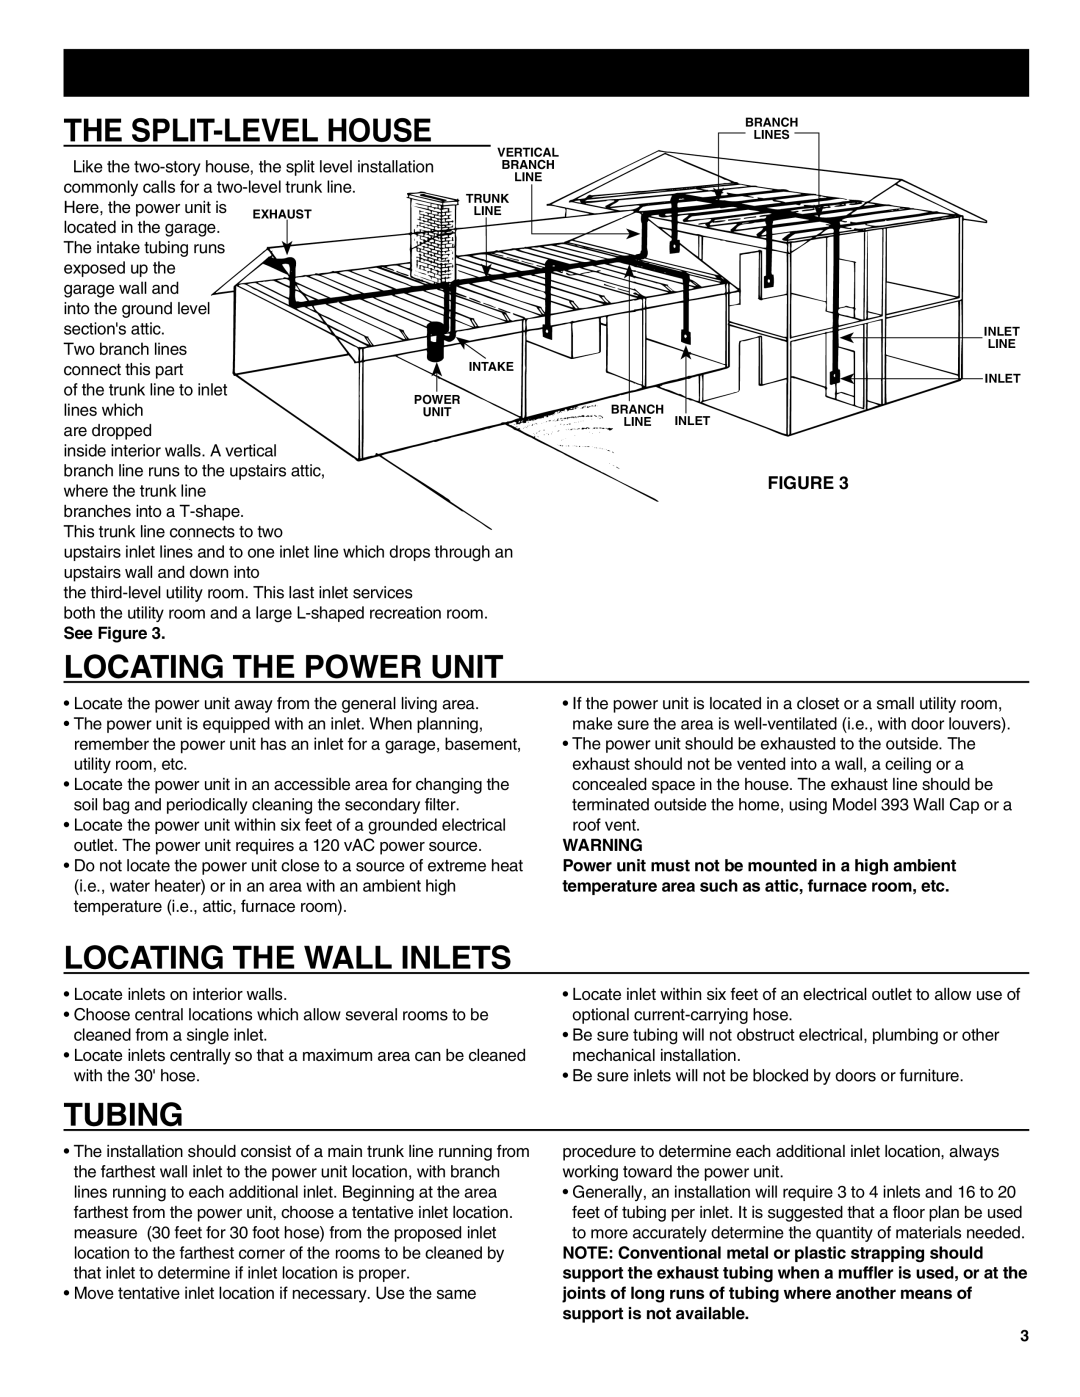 NuTone CV352 manual The Split-Levelhouse, Locating The Power Unit, Locating The Wall Inlets, Tubing, See Figure 